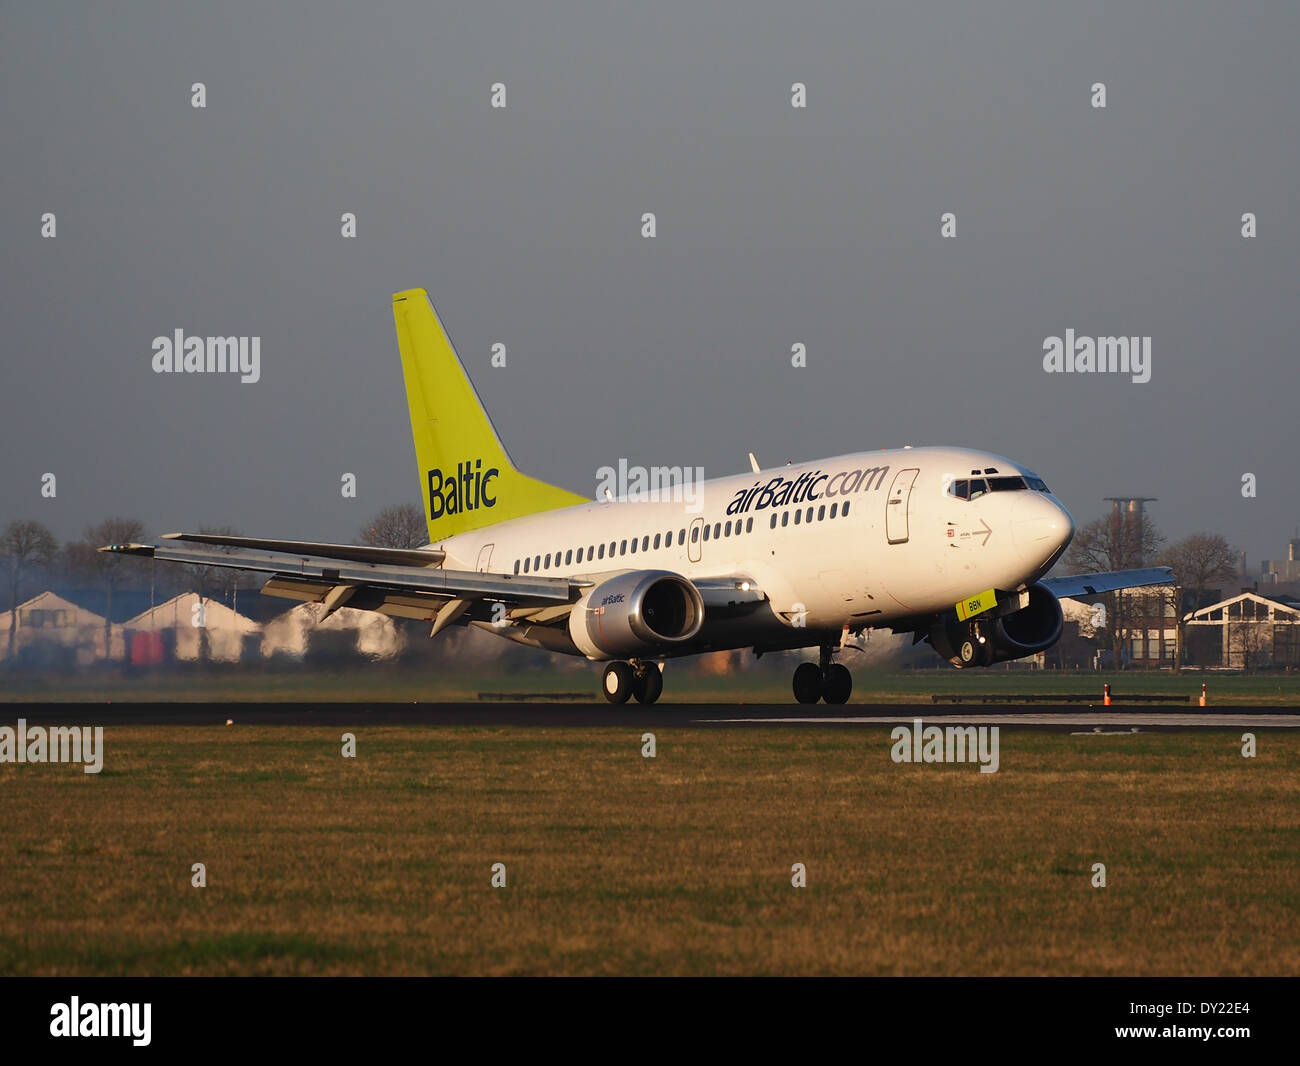 YL-BBN Air Baltic Boeing 737-522 - cn 26683, landing at AMS Amsterdam (Schiphol), pic2 Stock Photo